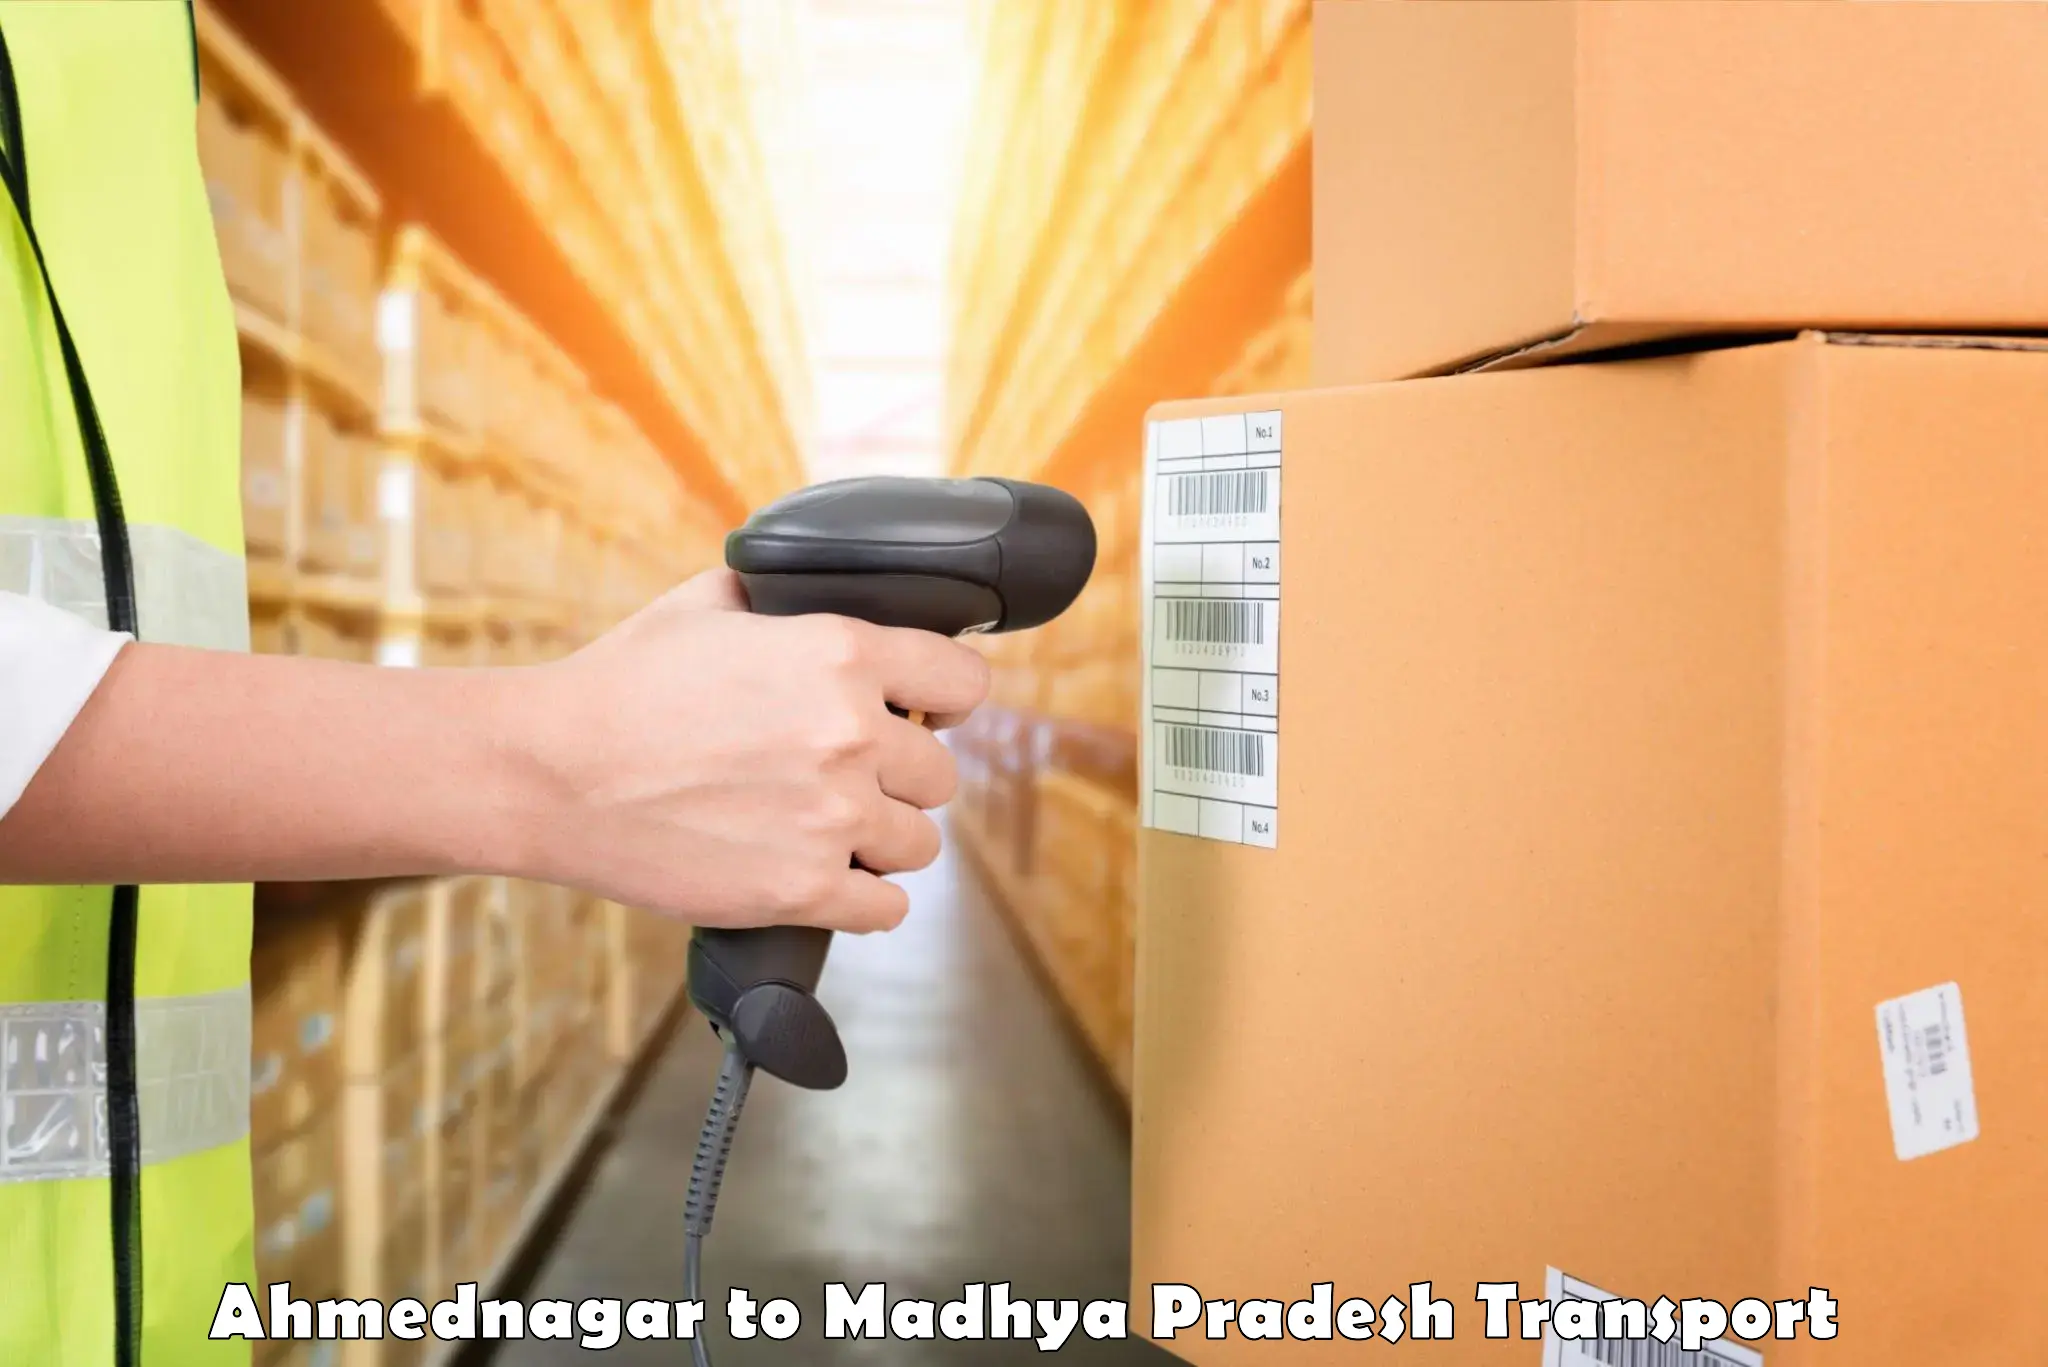 Delivery service Ahmednagar to Jirapur